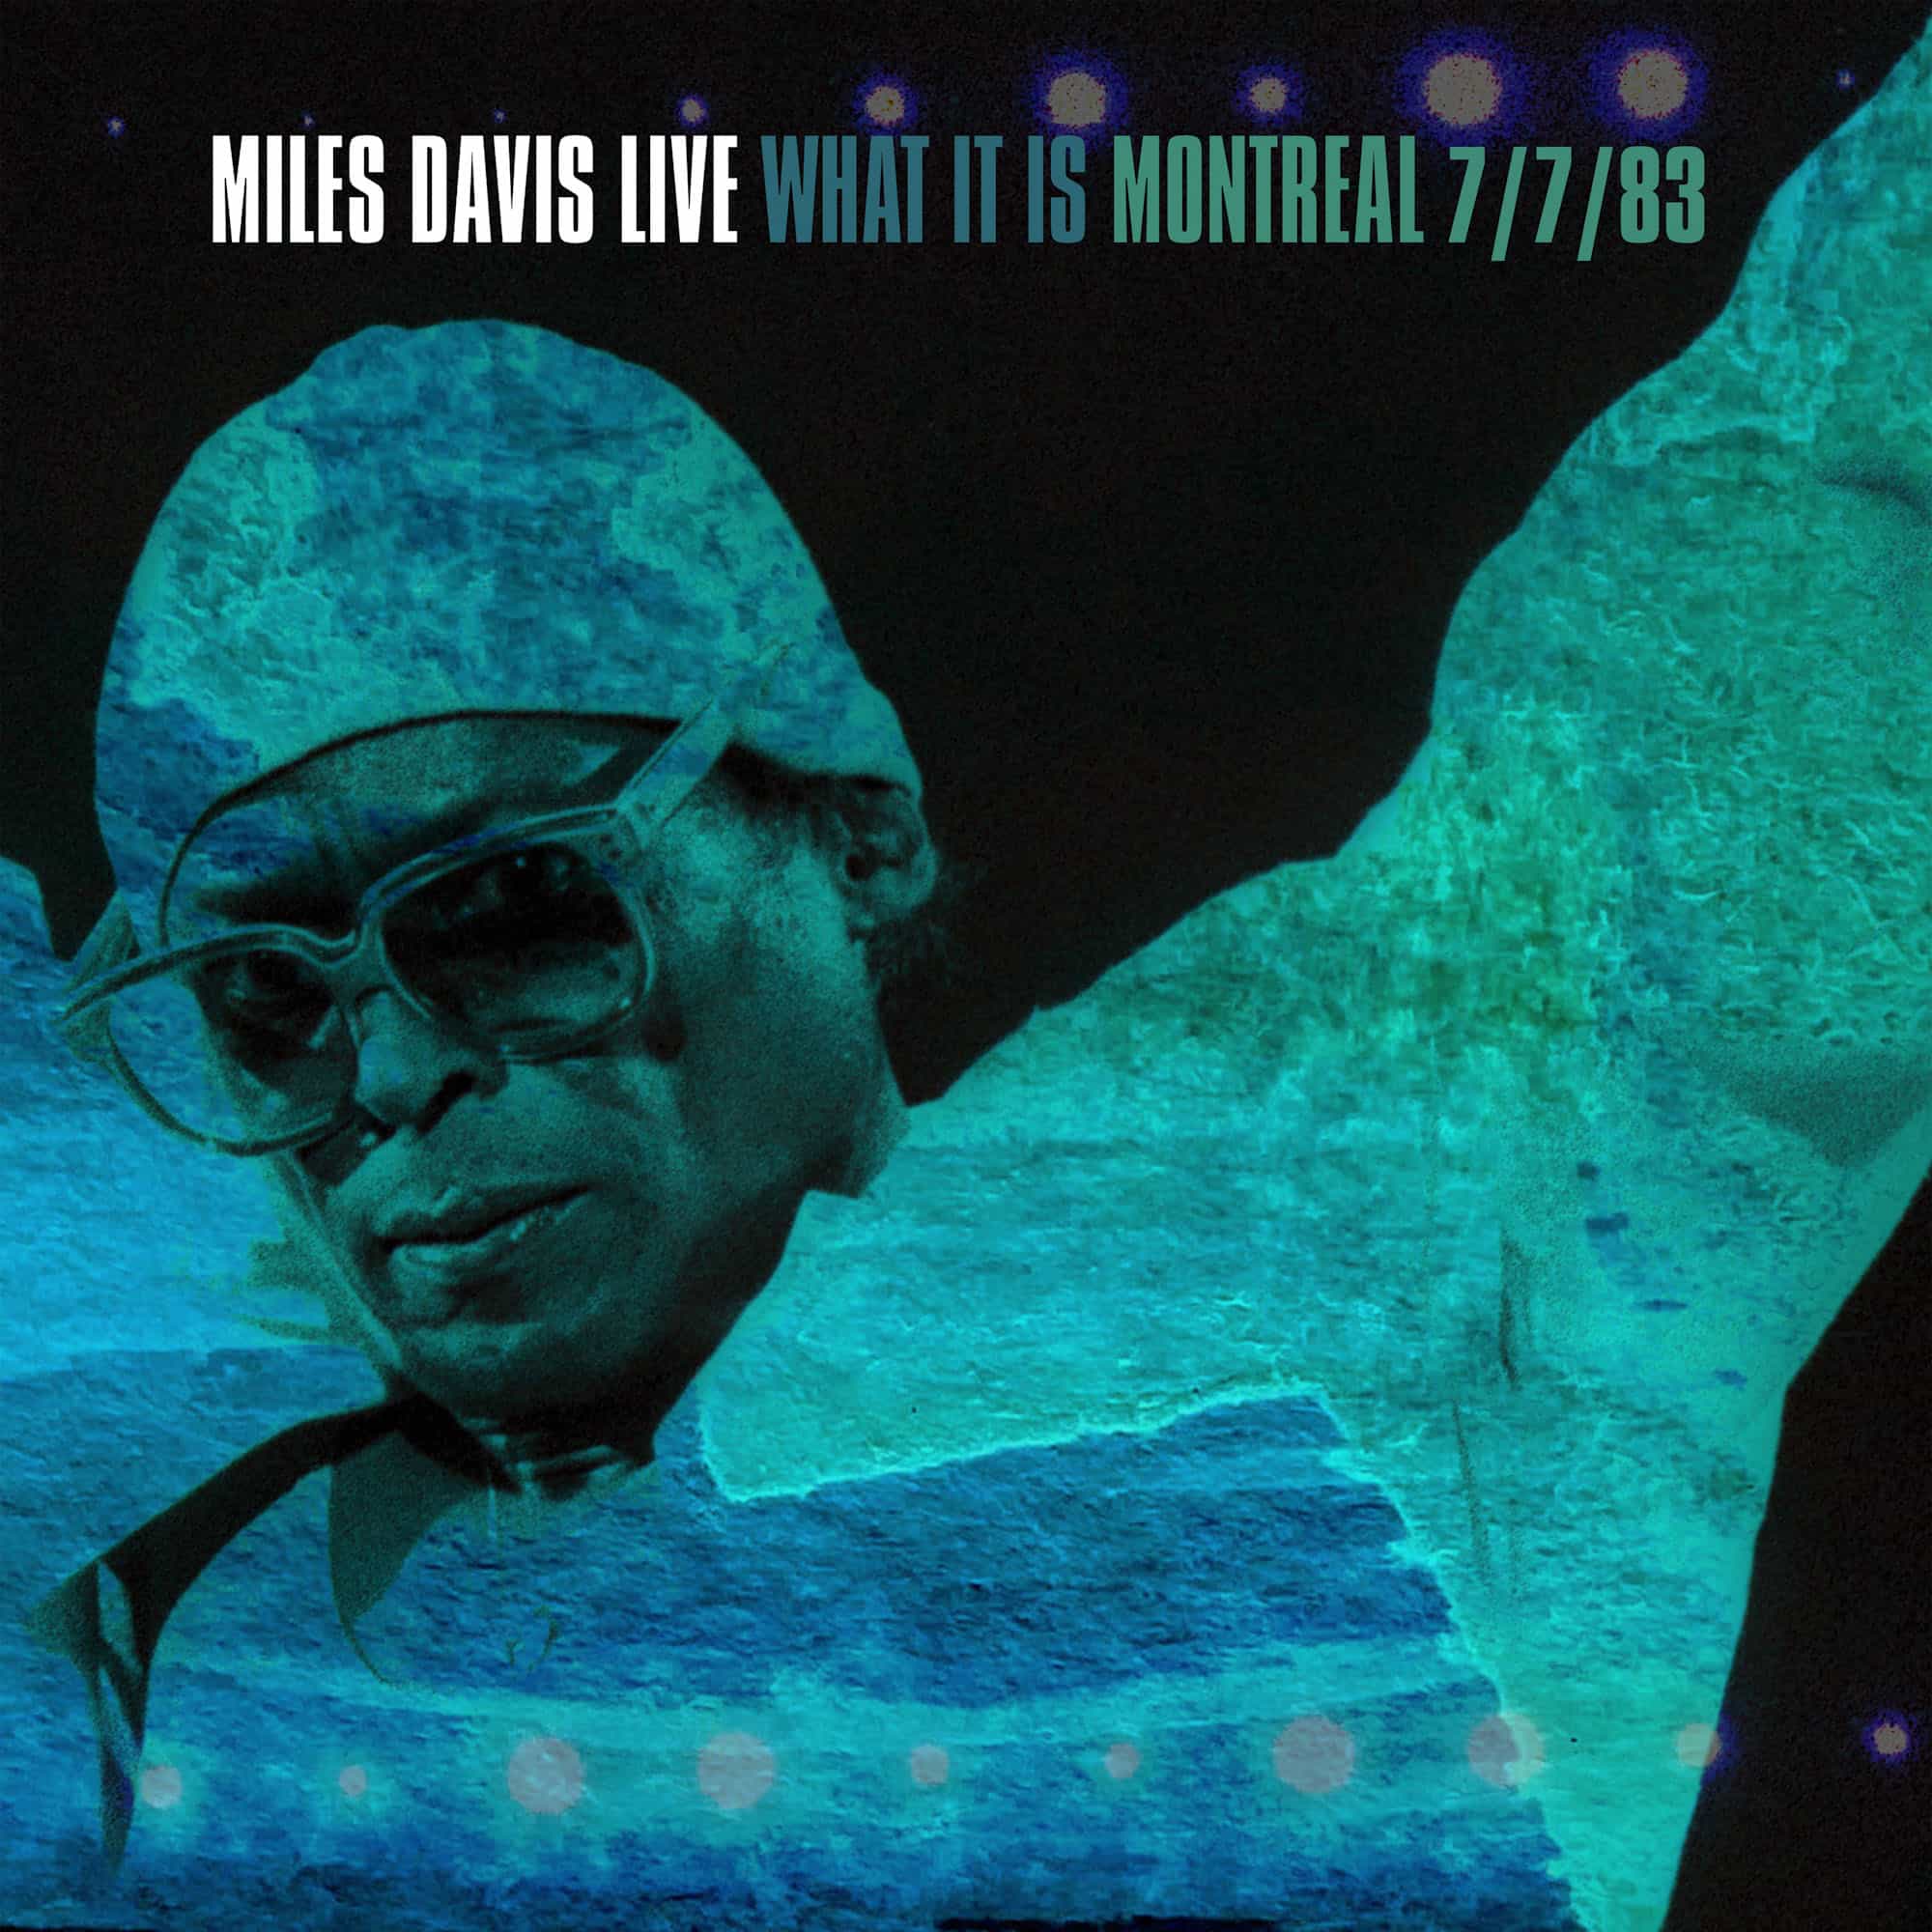 Miles Davis Live In Montreal, July 7, 1983 RSD_2022 Analogue October Records